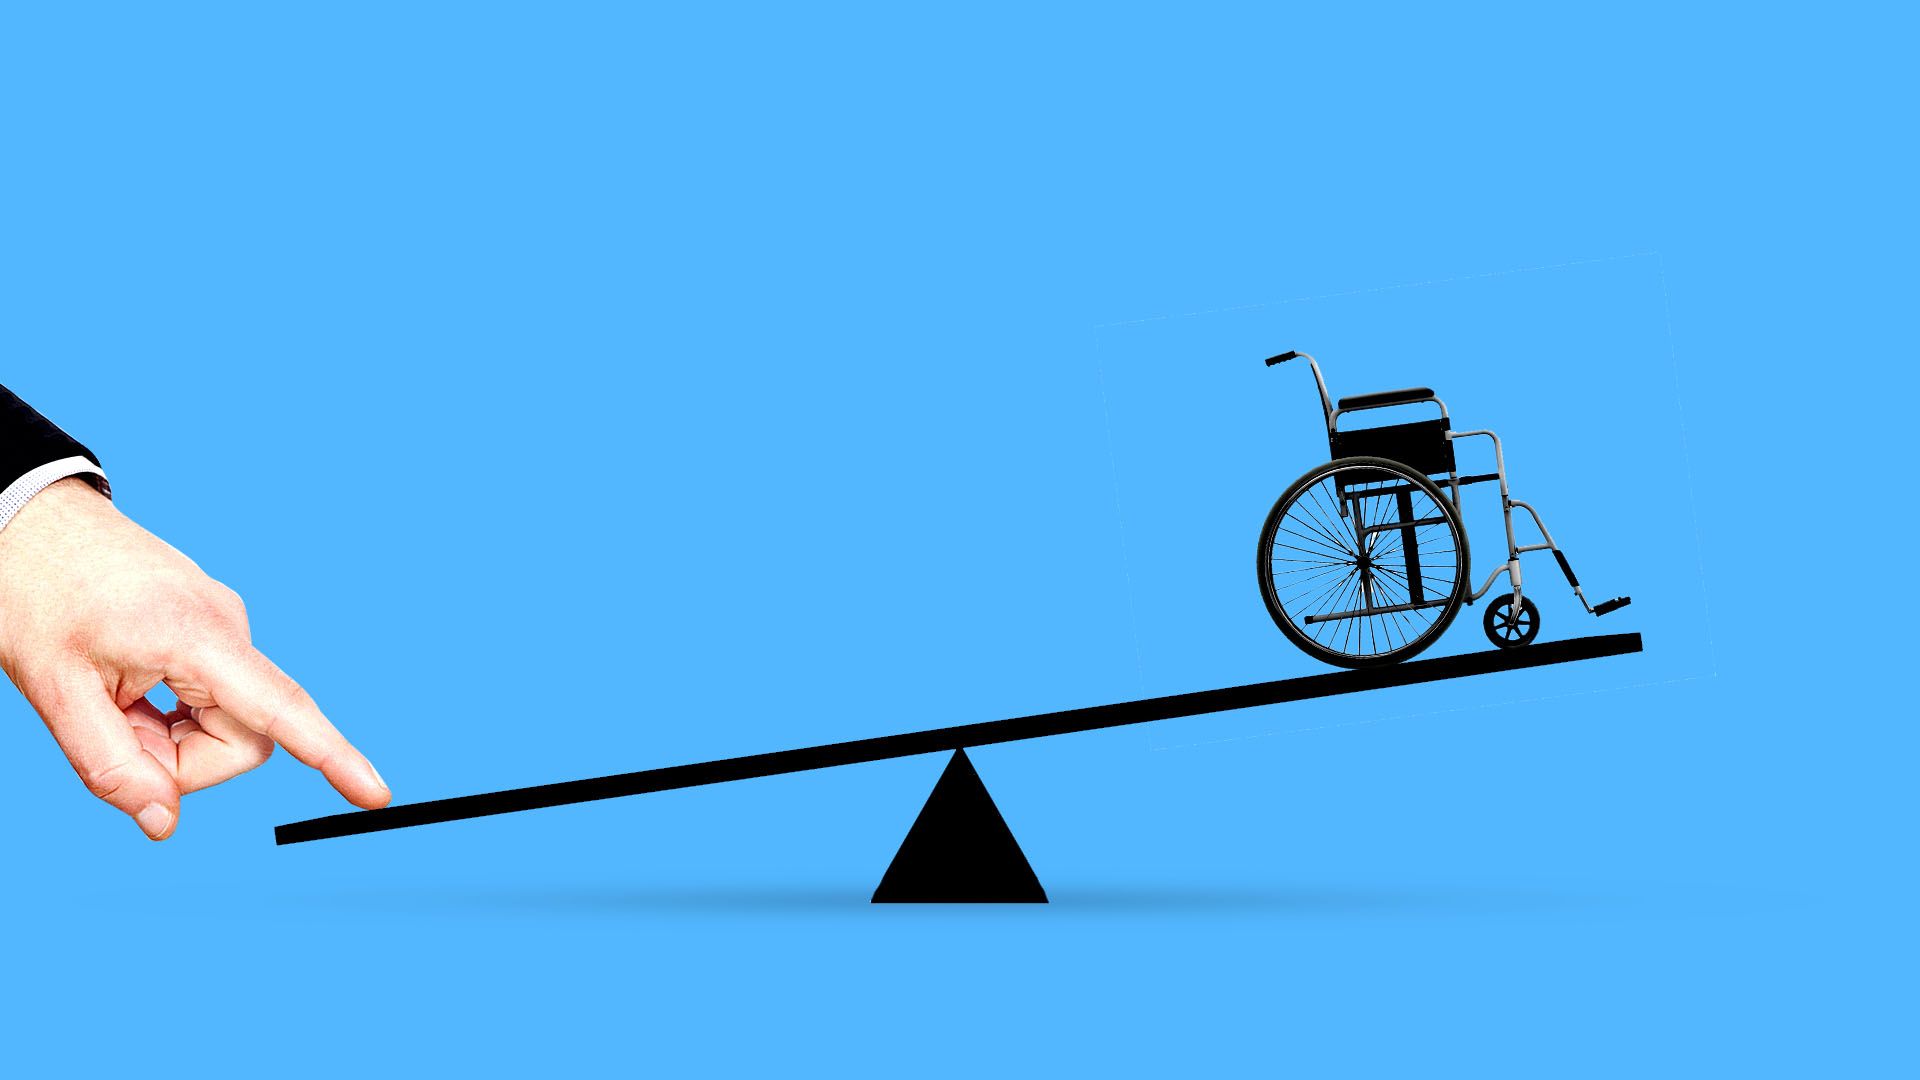 Illustration of a wheelchair on one side of a seesaw with a hand pressing down the other side.